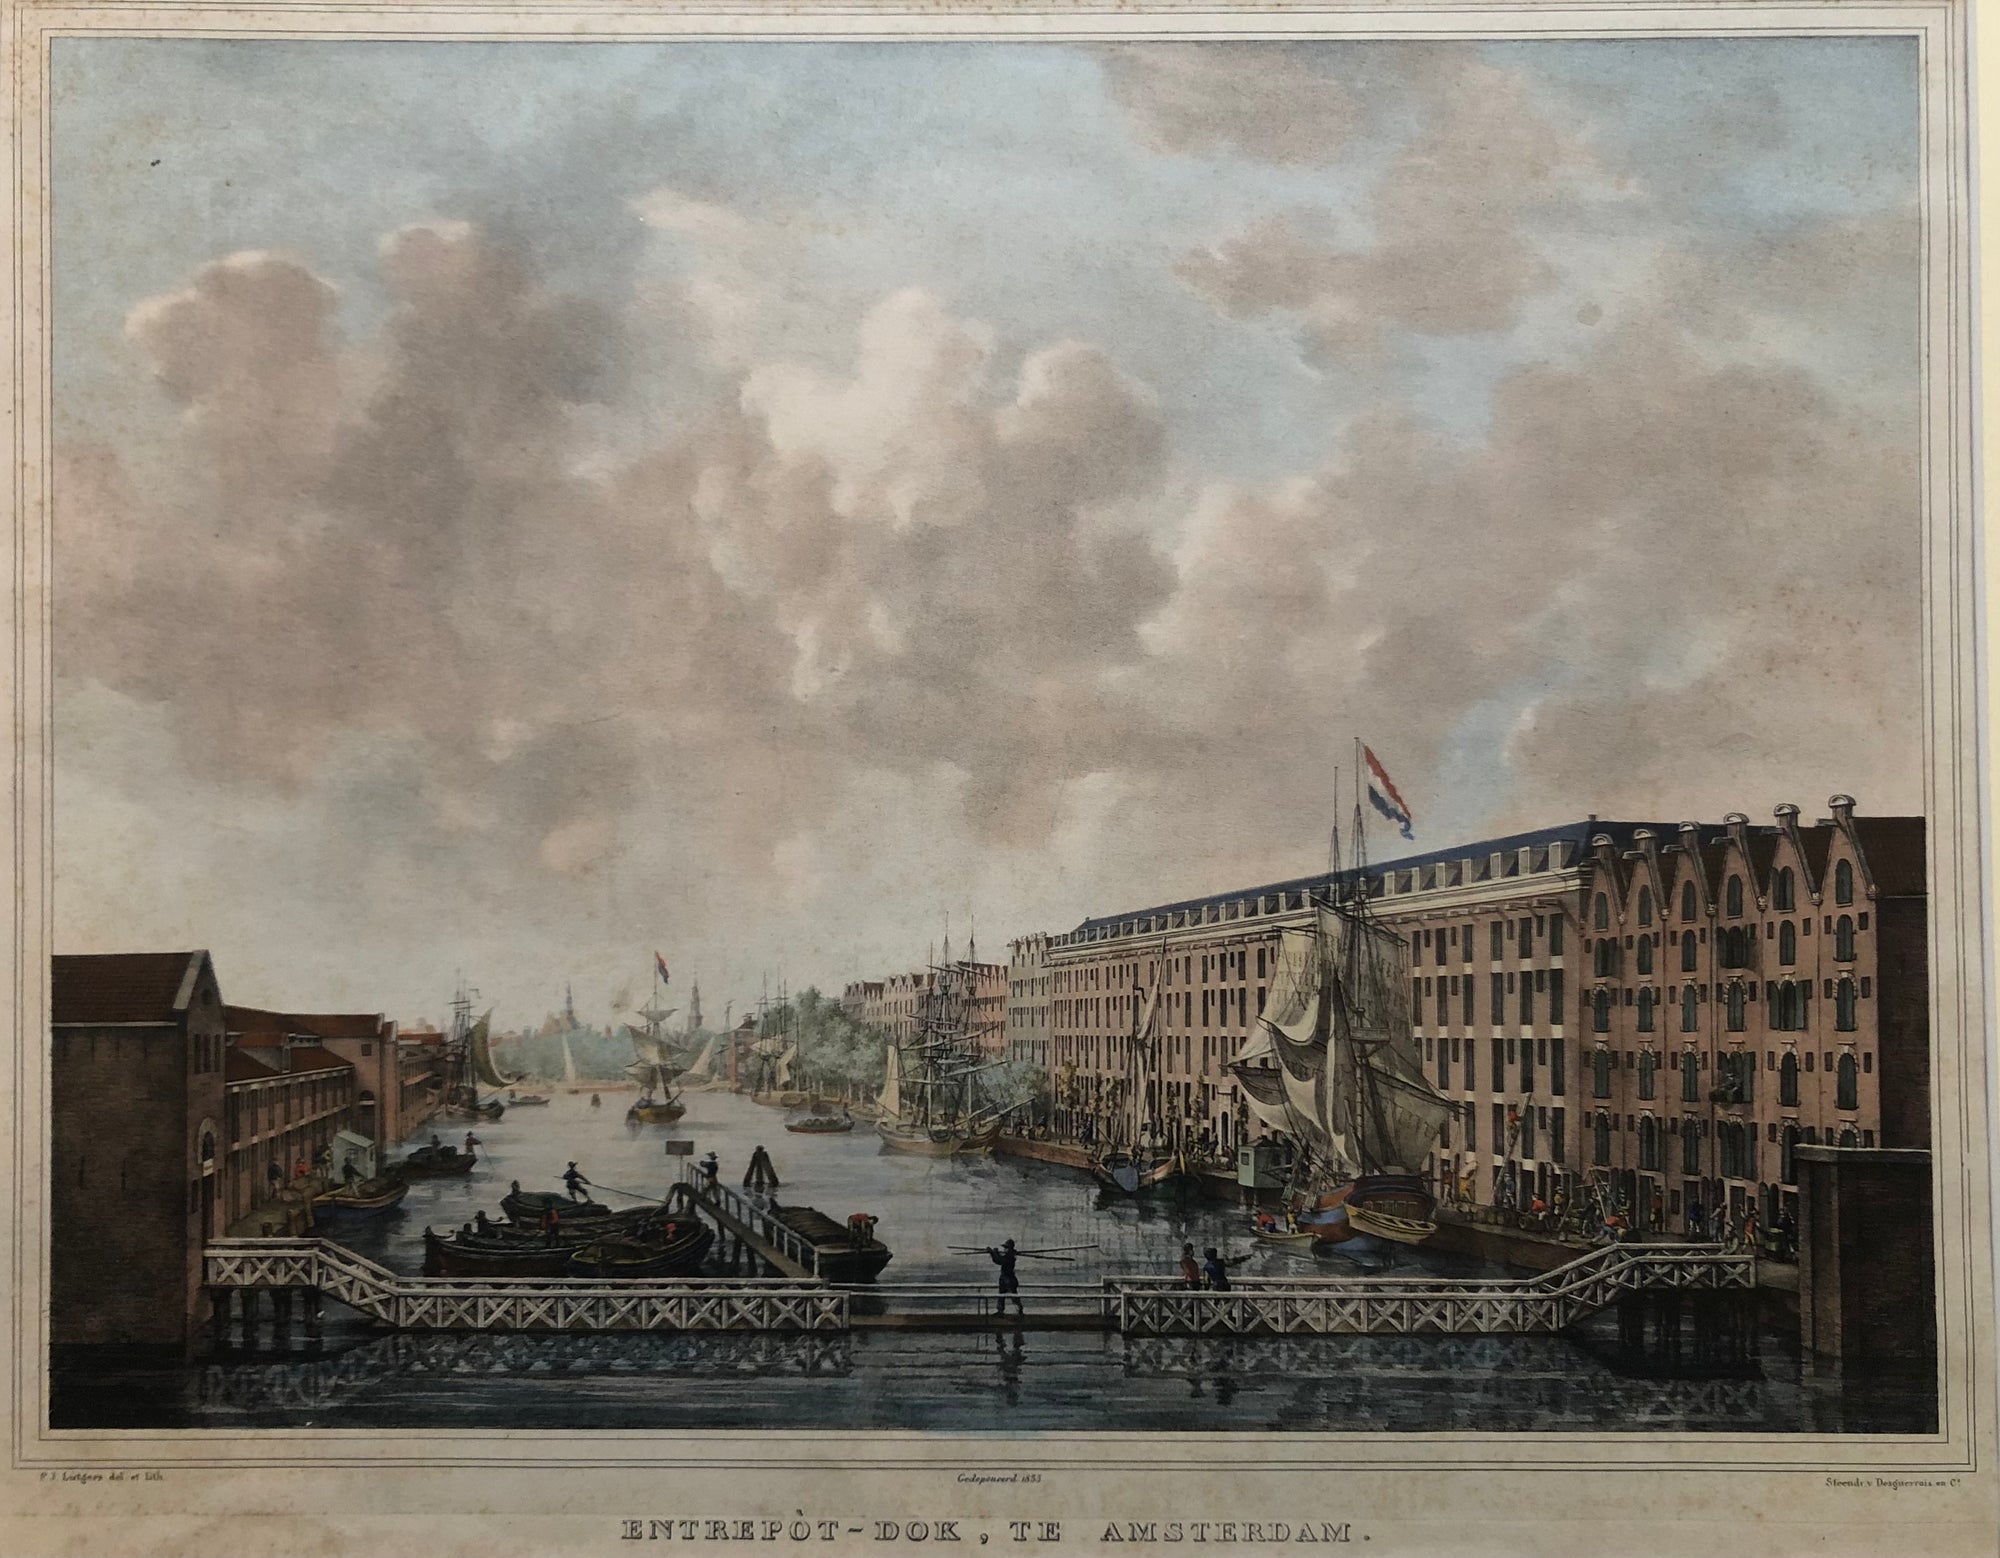 'Entrepòt - Dok, Te Amsterdam' . The Entrepotdok in Amsterdamseen from the Muidergracht to the Nieuwe Herengracht. Handcoloured lithograph drawn by Petrus Josephus Lutgers and published by  Desguerrois en Co. in 1833.